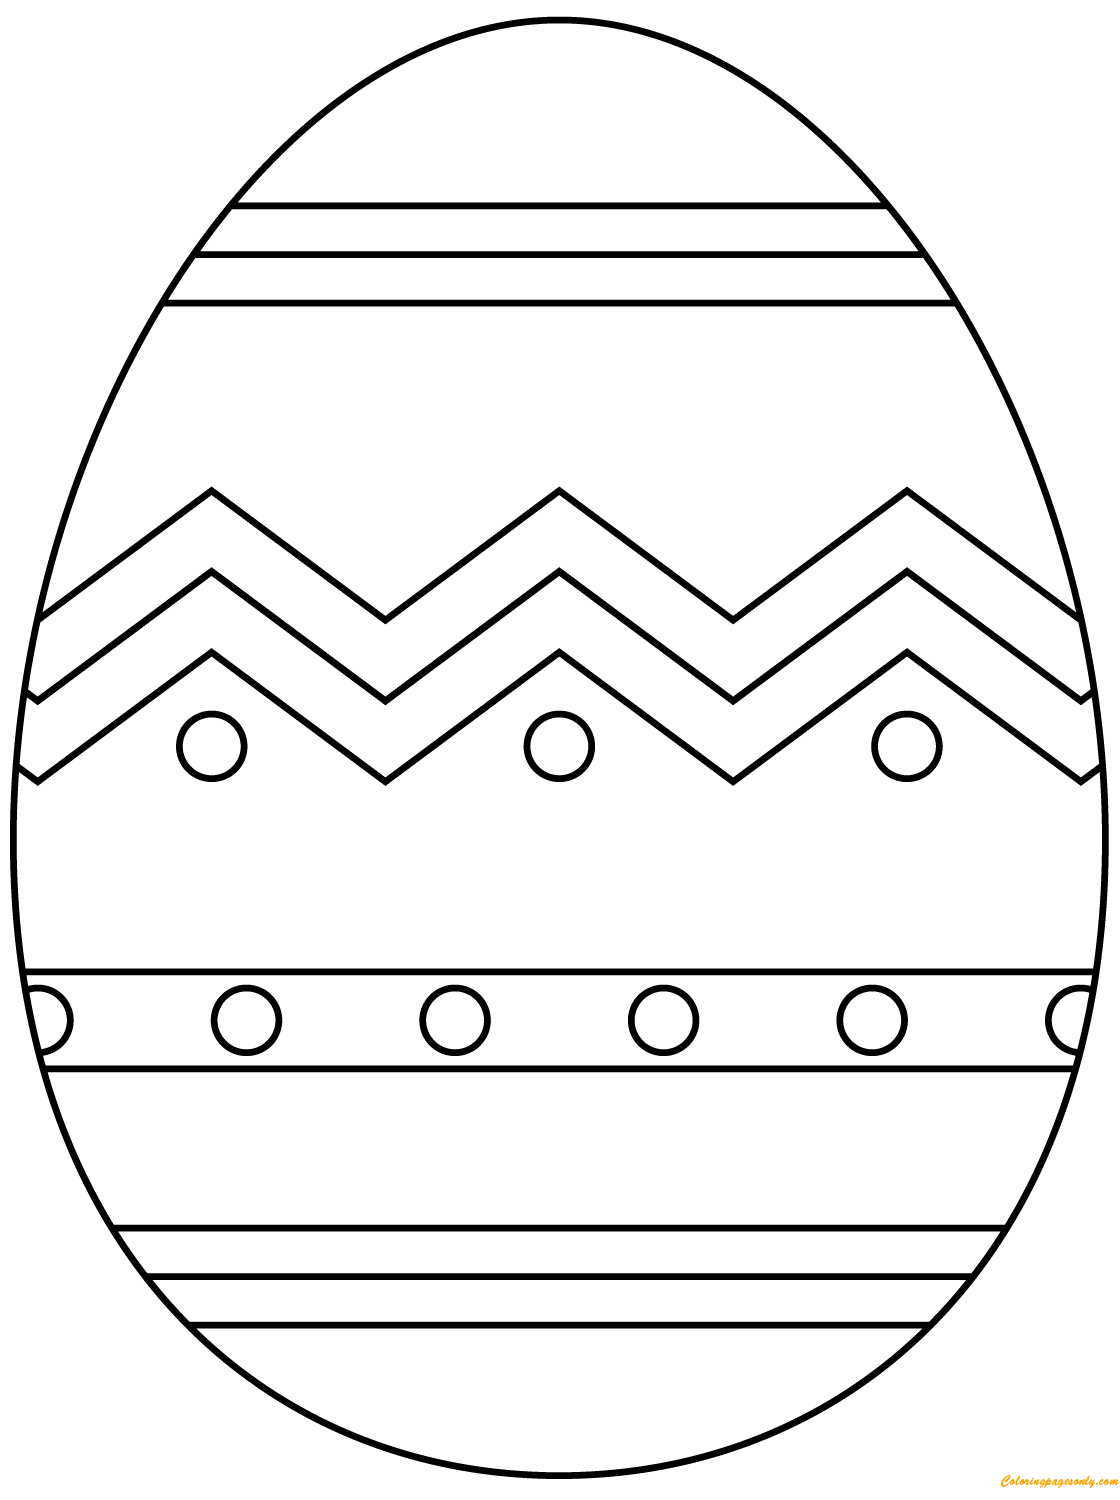 abstract-pattern-easter-egg-coloring-page-free-coloring-pages-online